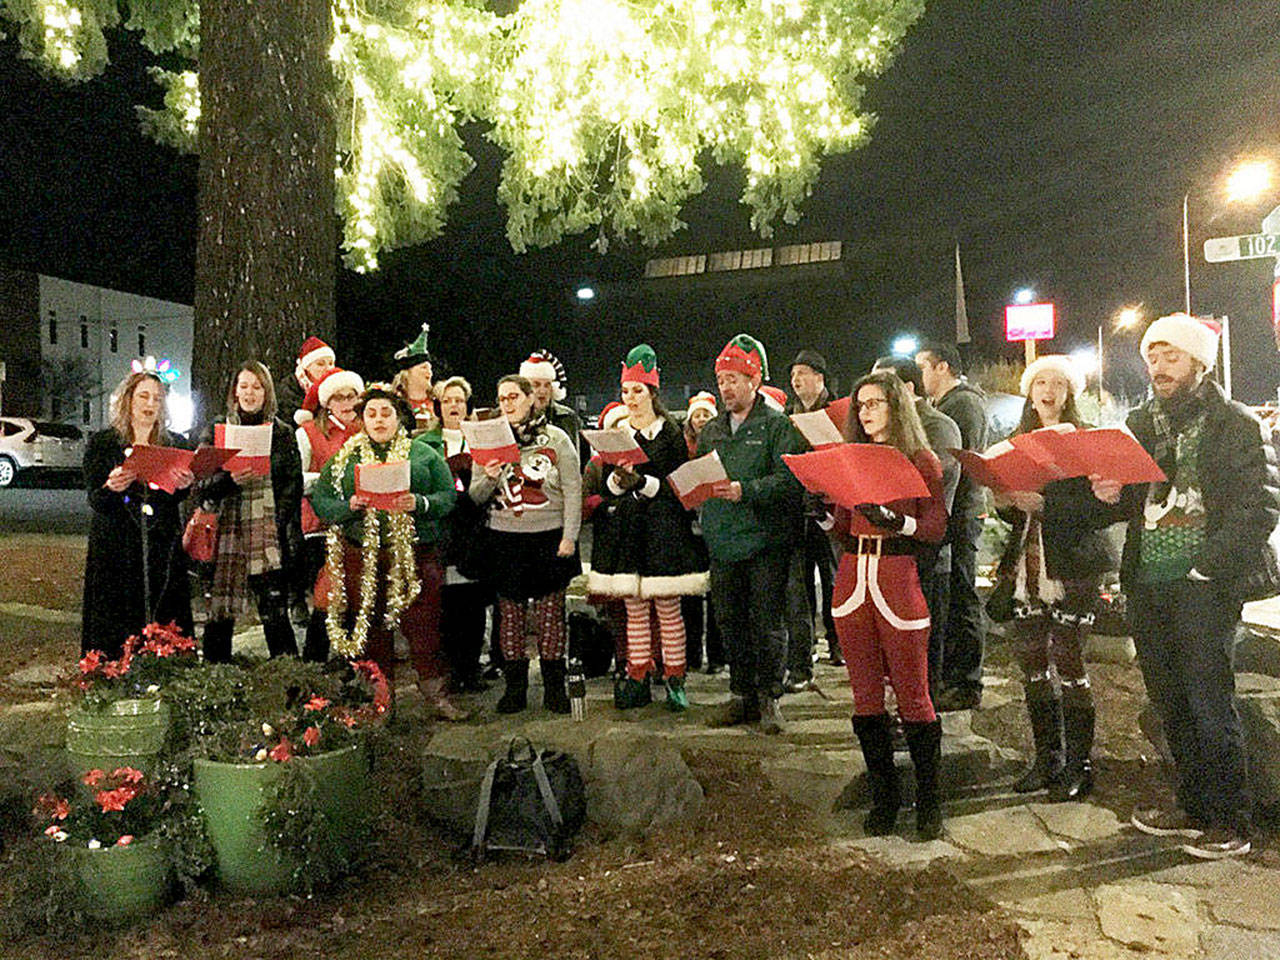 ‘It’s a fun, festive time’: Bothell-Kenmore Chamber putting on third holiday wine, beer, spirits walk